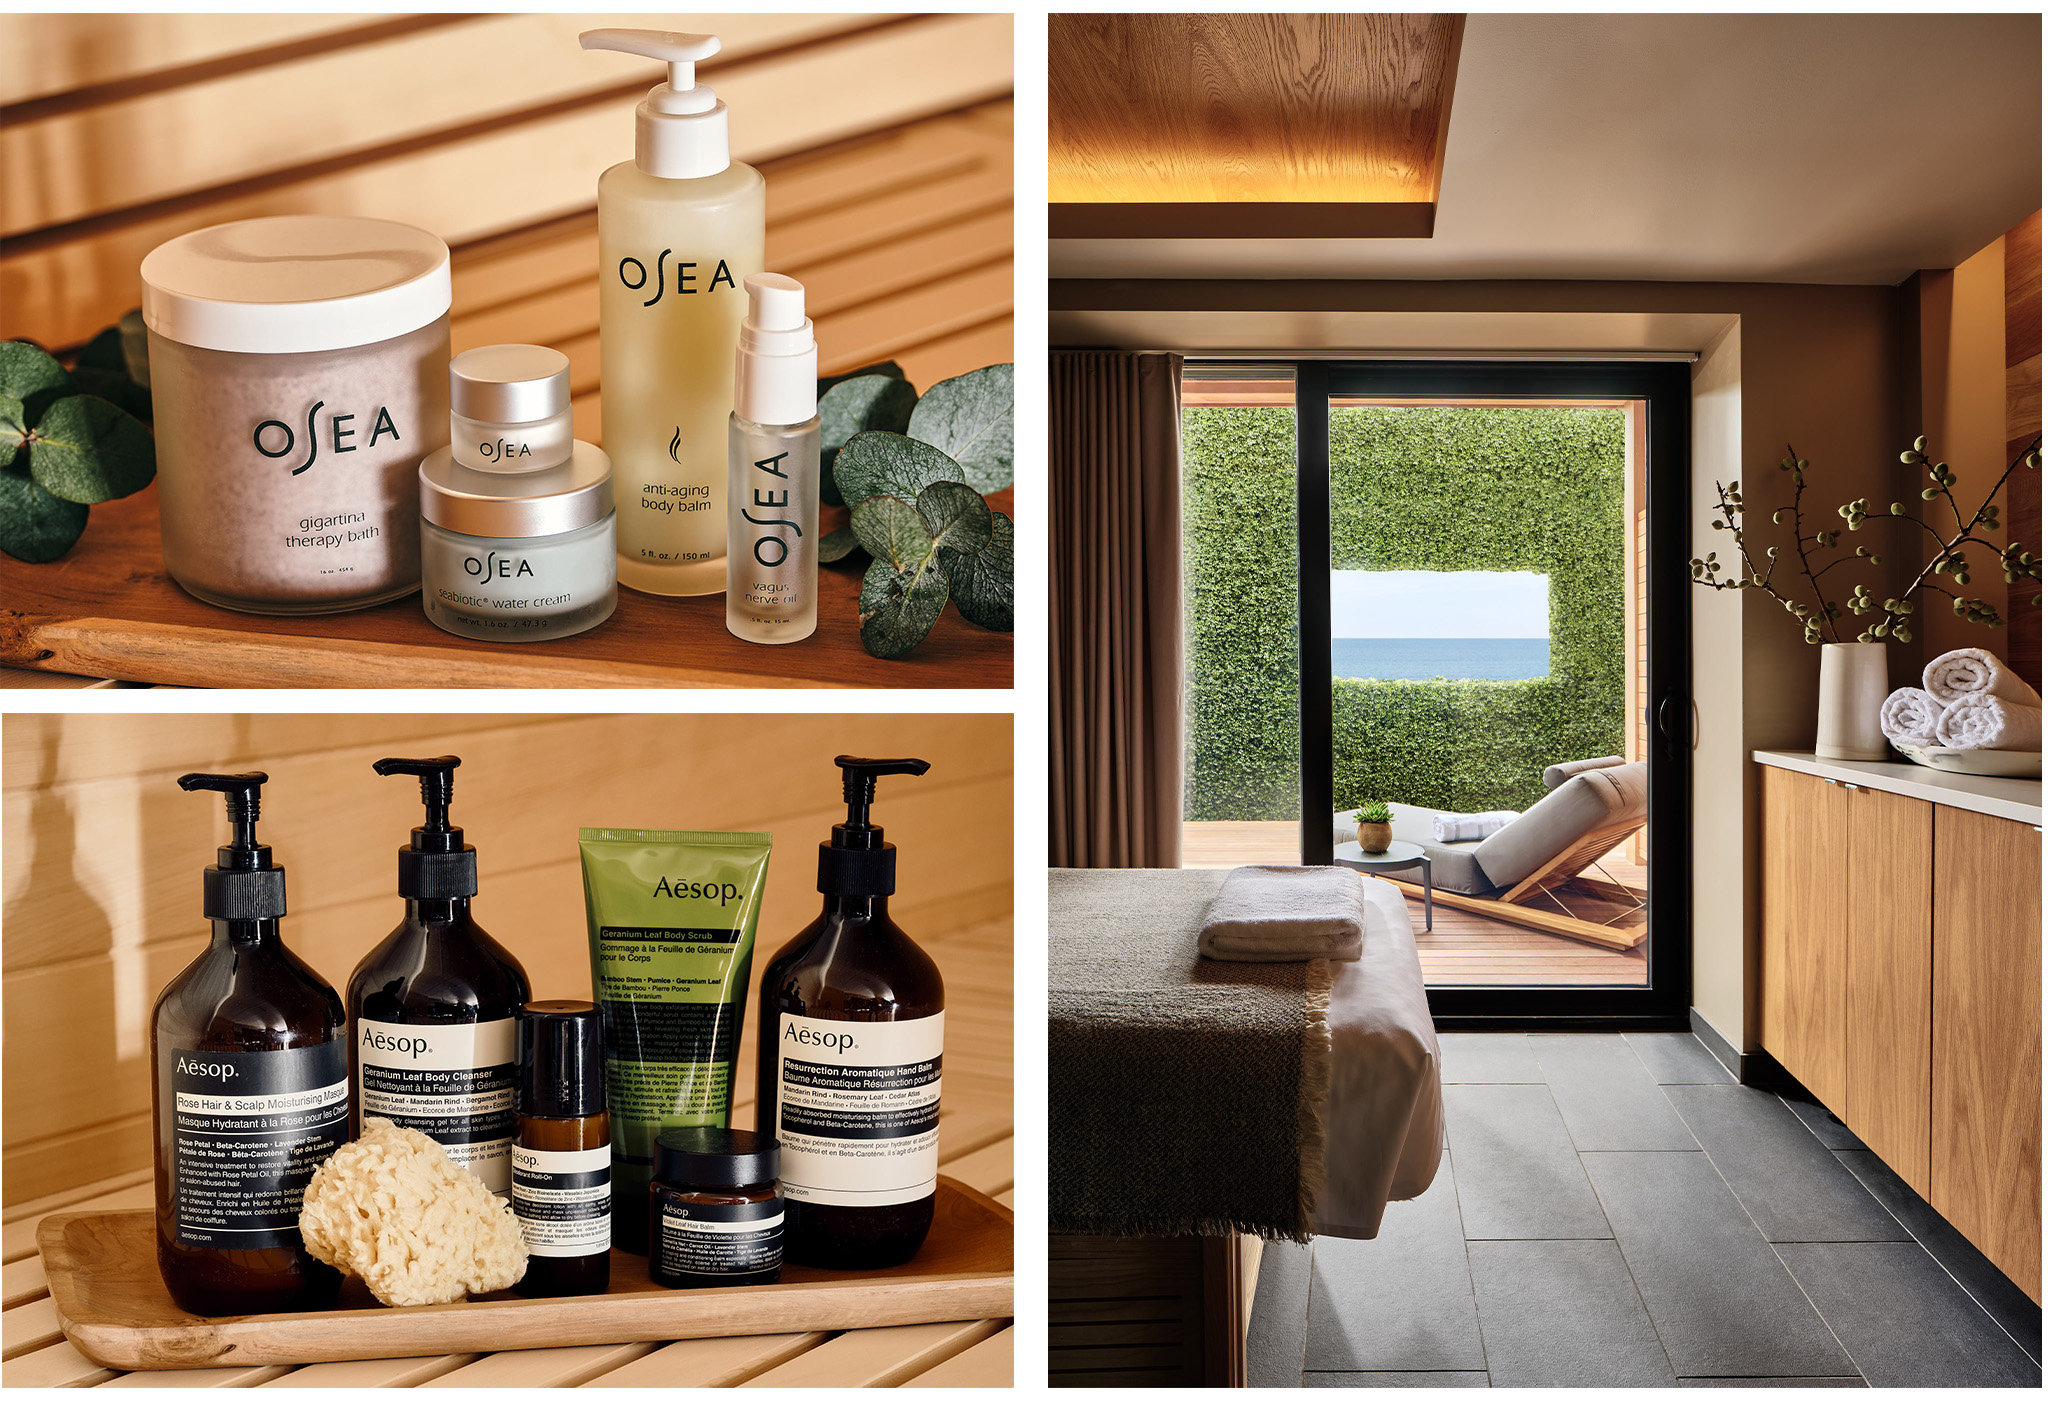 Collage showing Osea products, Aesop product and Seawater Spa's treatment suite with outdoor patio and seating area.